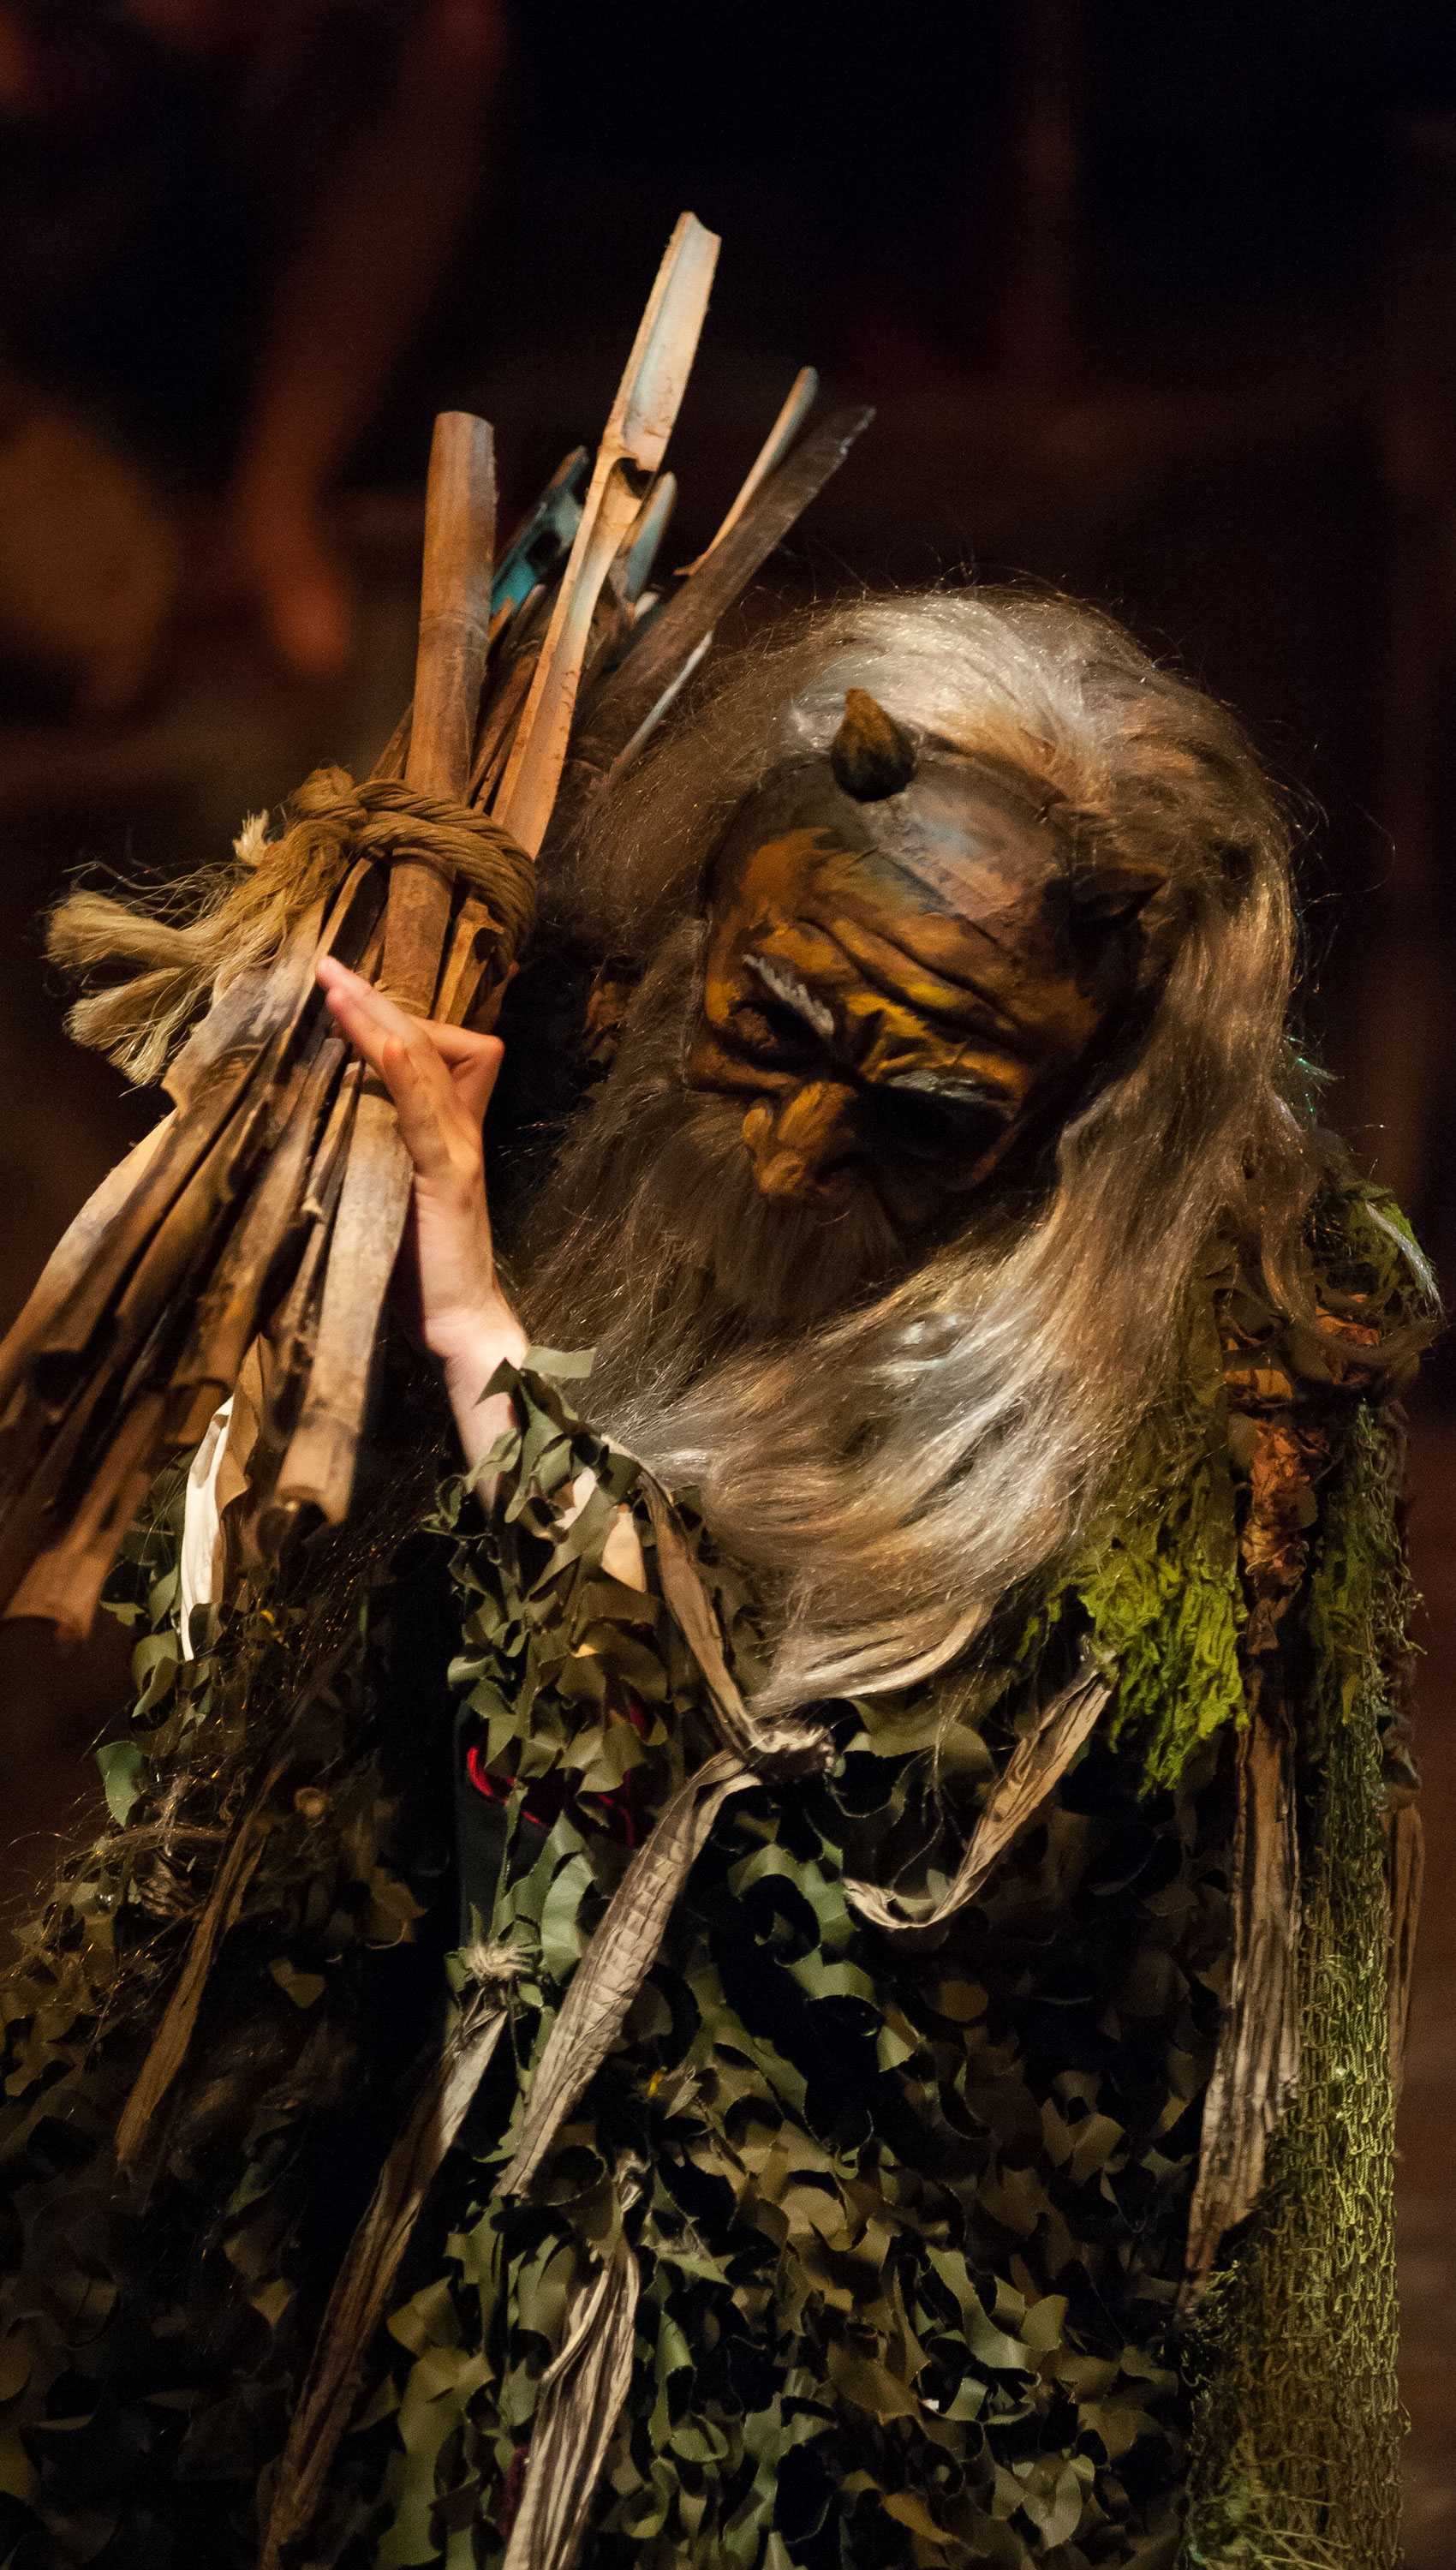 A character with a mask carries a bundle of sticks on their shoulder.